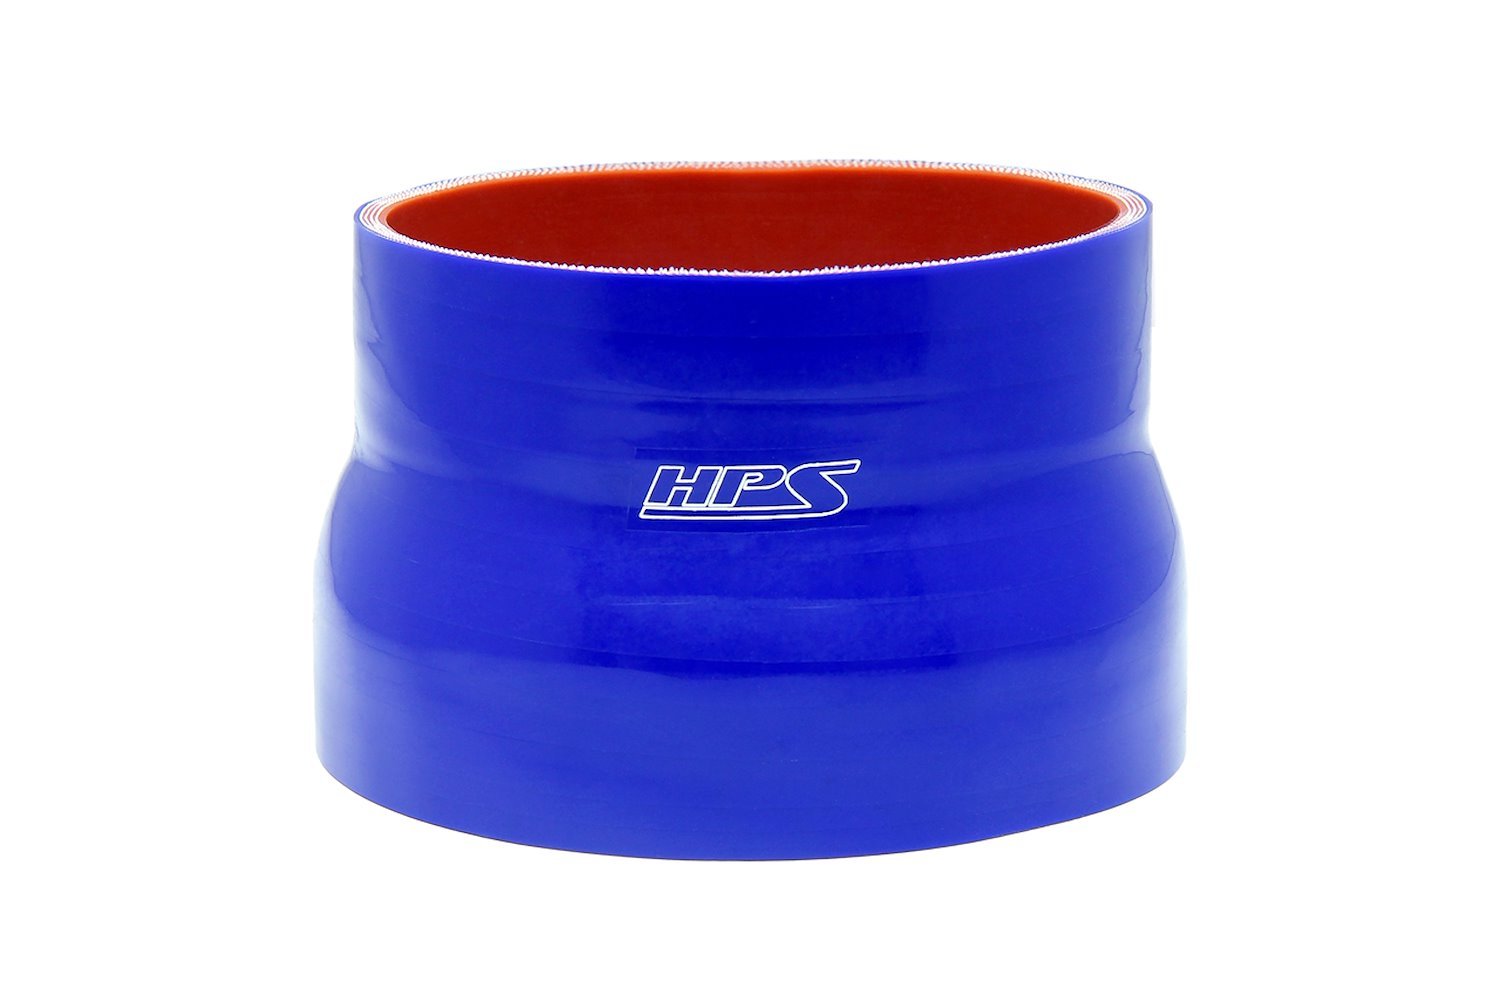 HTSR-425-450-L4-BLUE Silicone Reducer Hose, High-Temp 4-Ply Reinforced, 4-1/4 in. - 4-1/2 in. ID, 4 in. Long, Blue